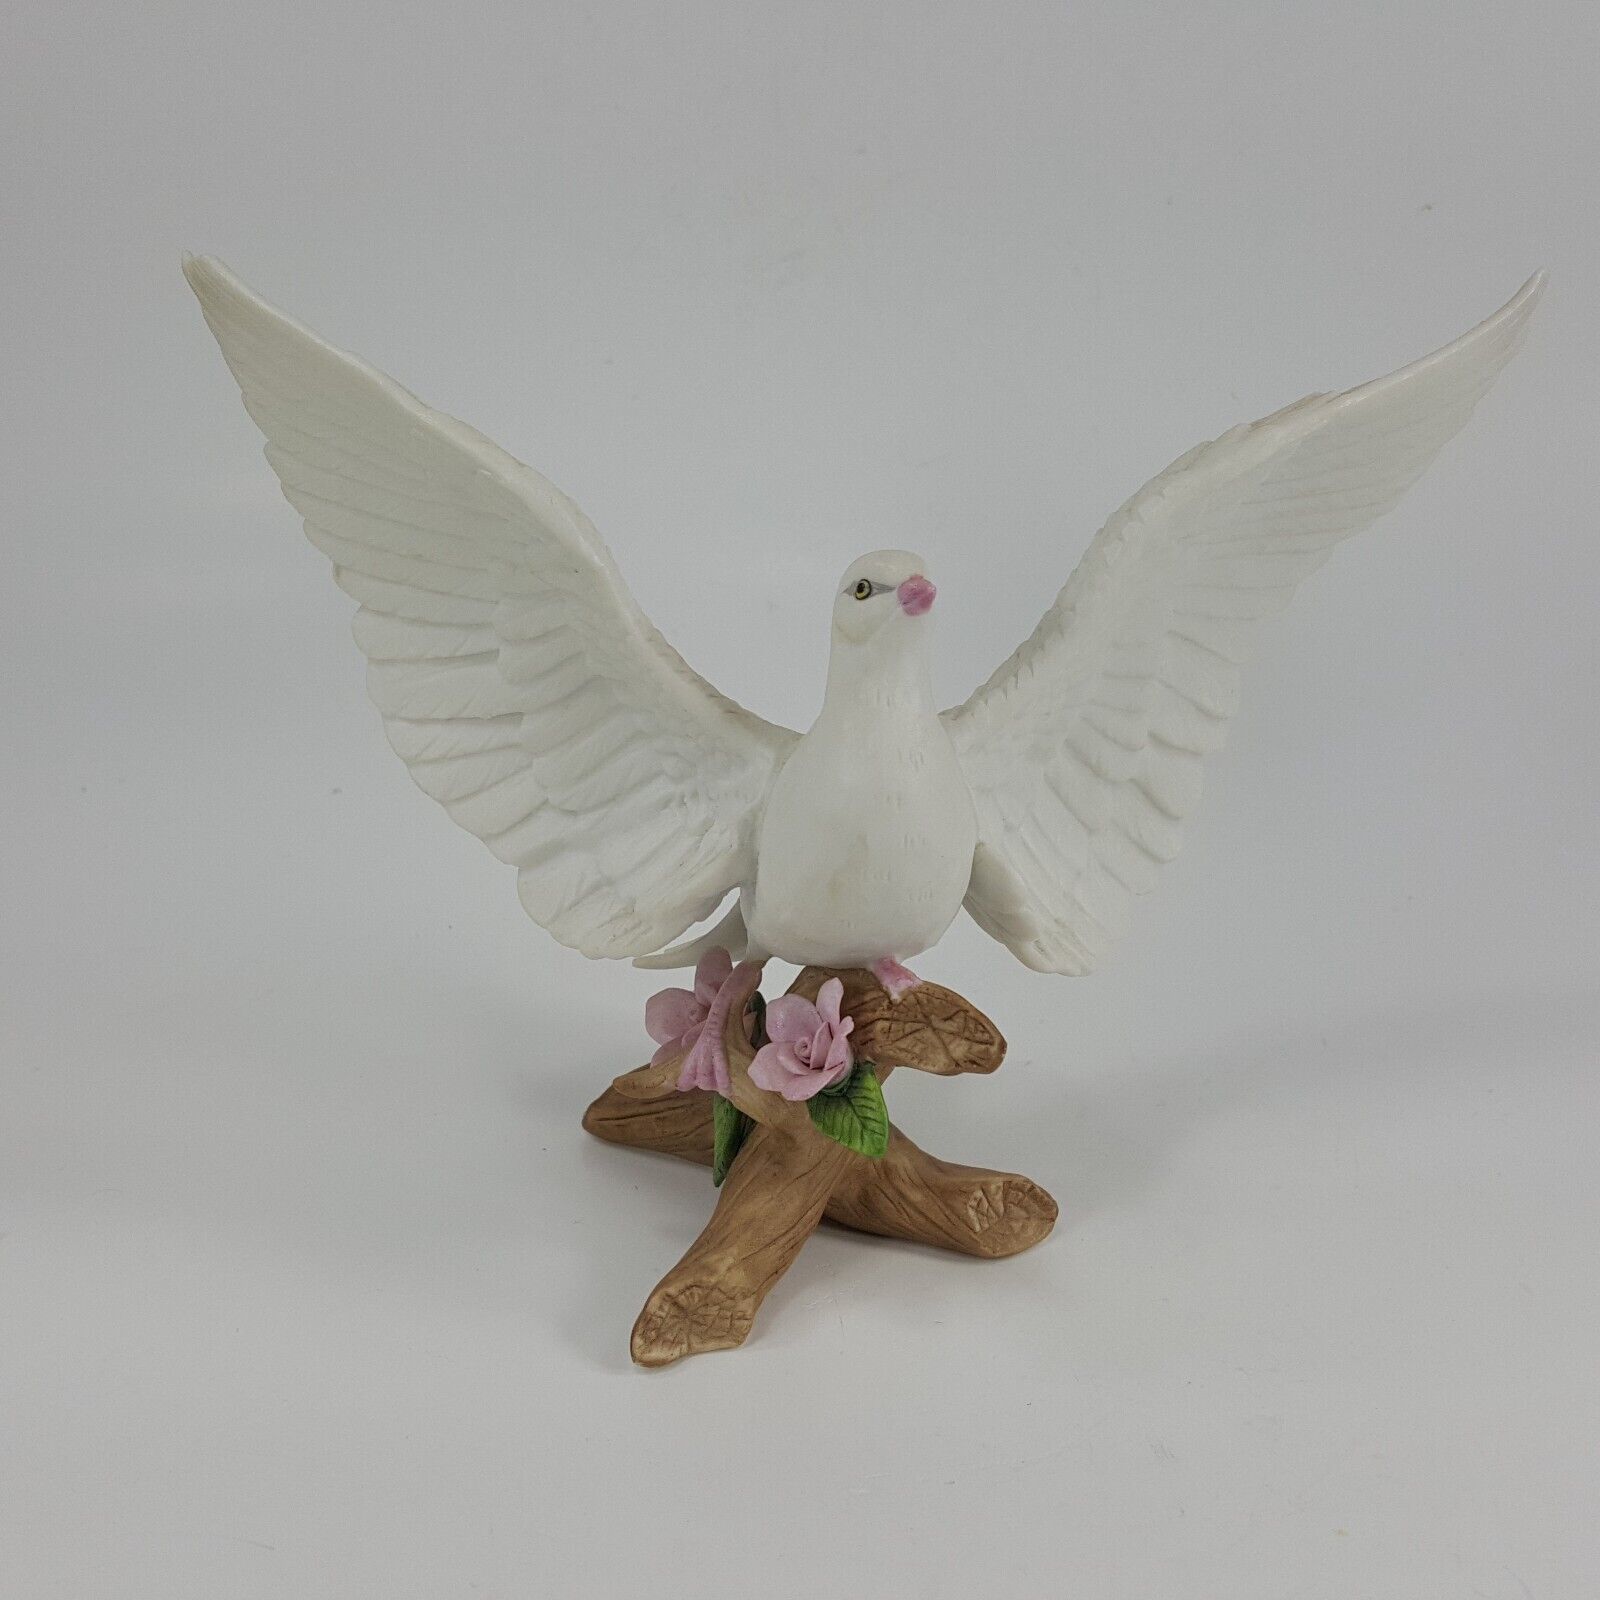 Primary image for Beautiful 1985 Lefton "White Dove" Porcelain Figurine 6.5" tall 04996 SBH8X